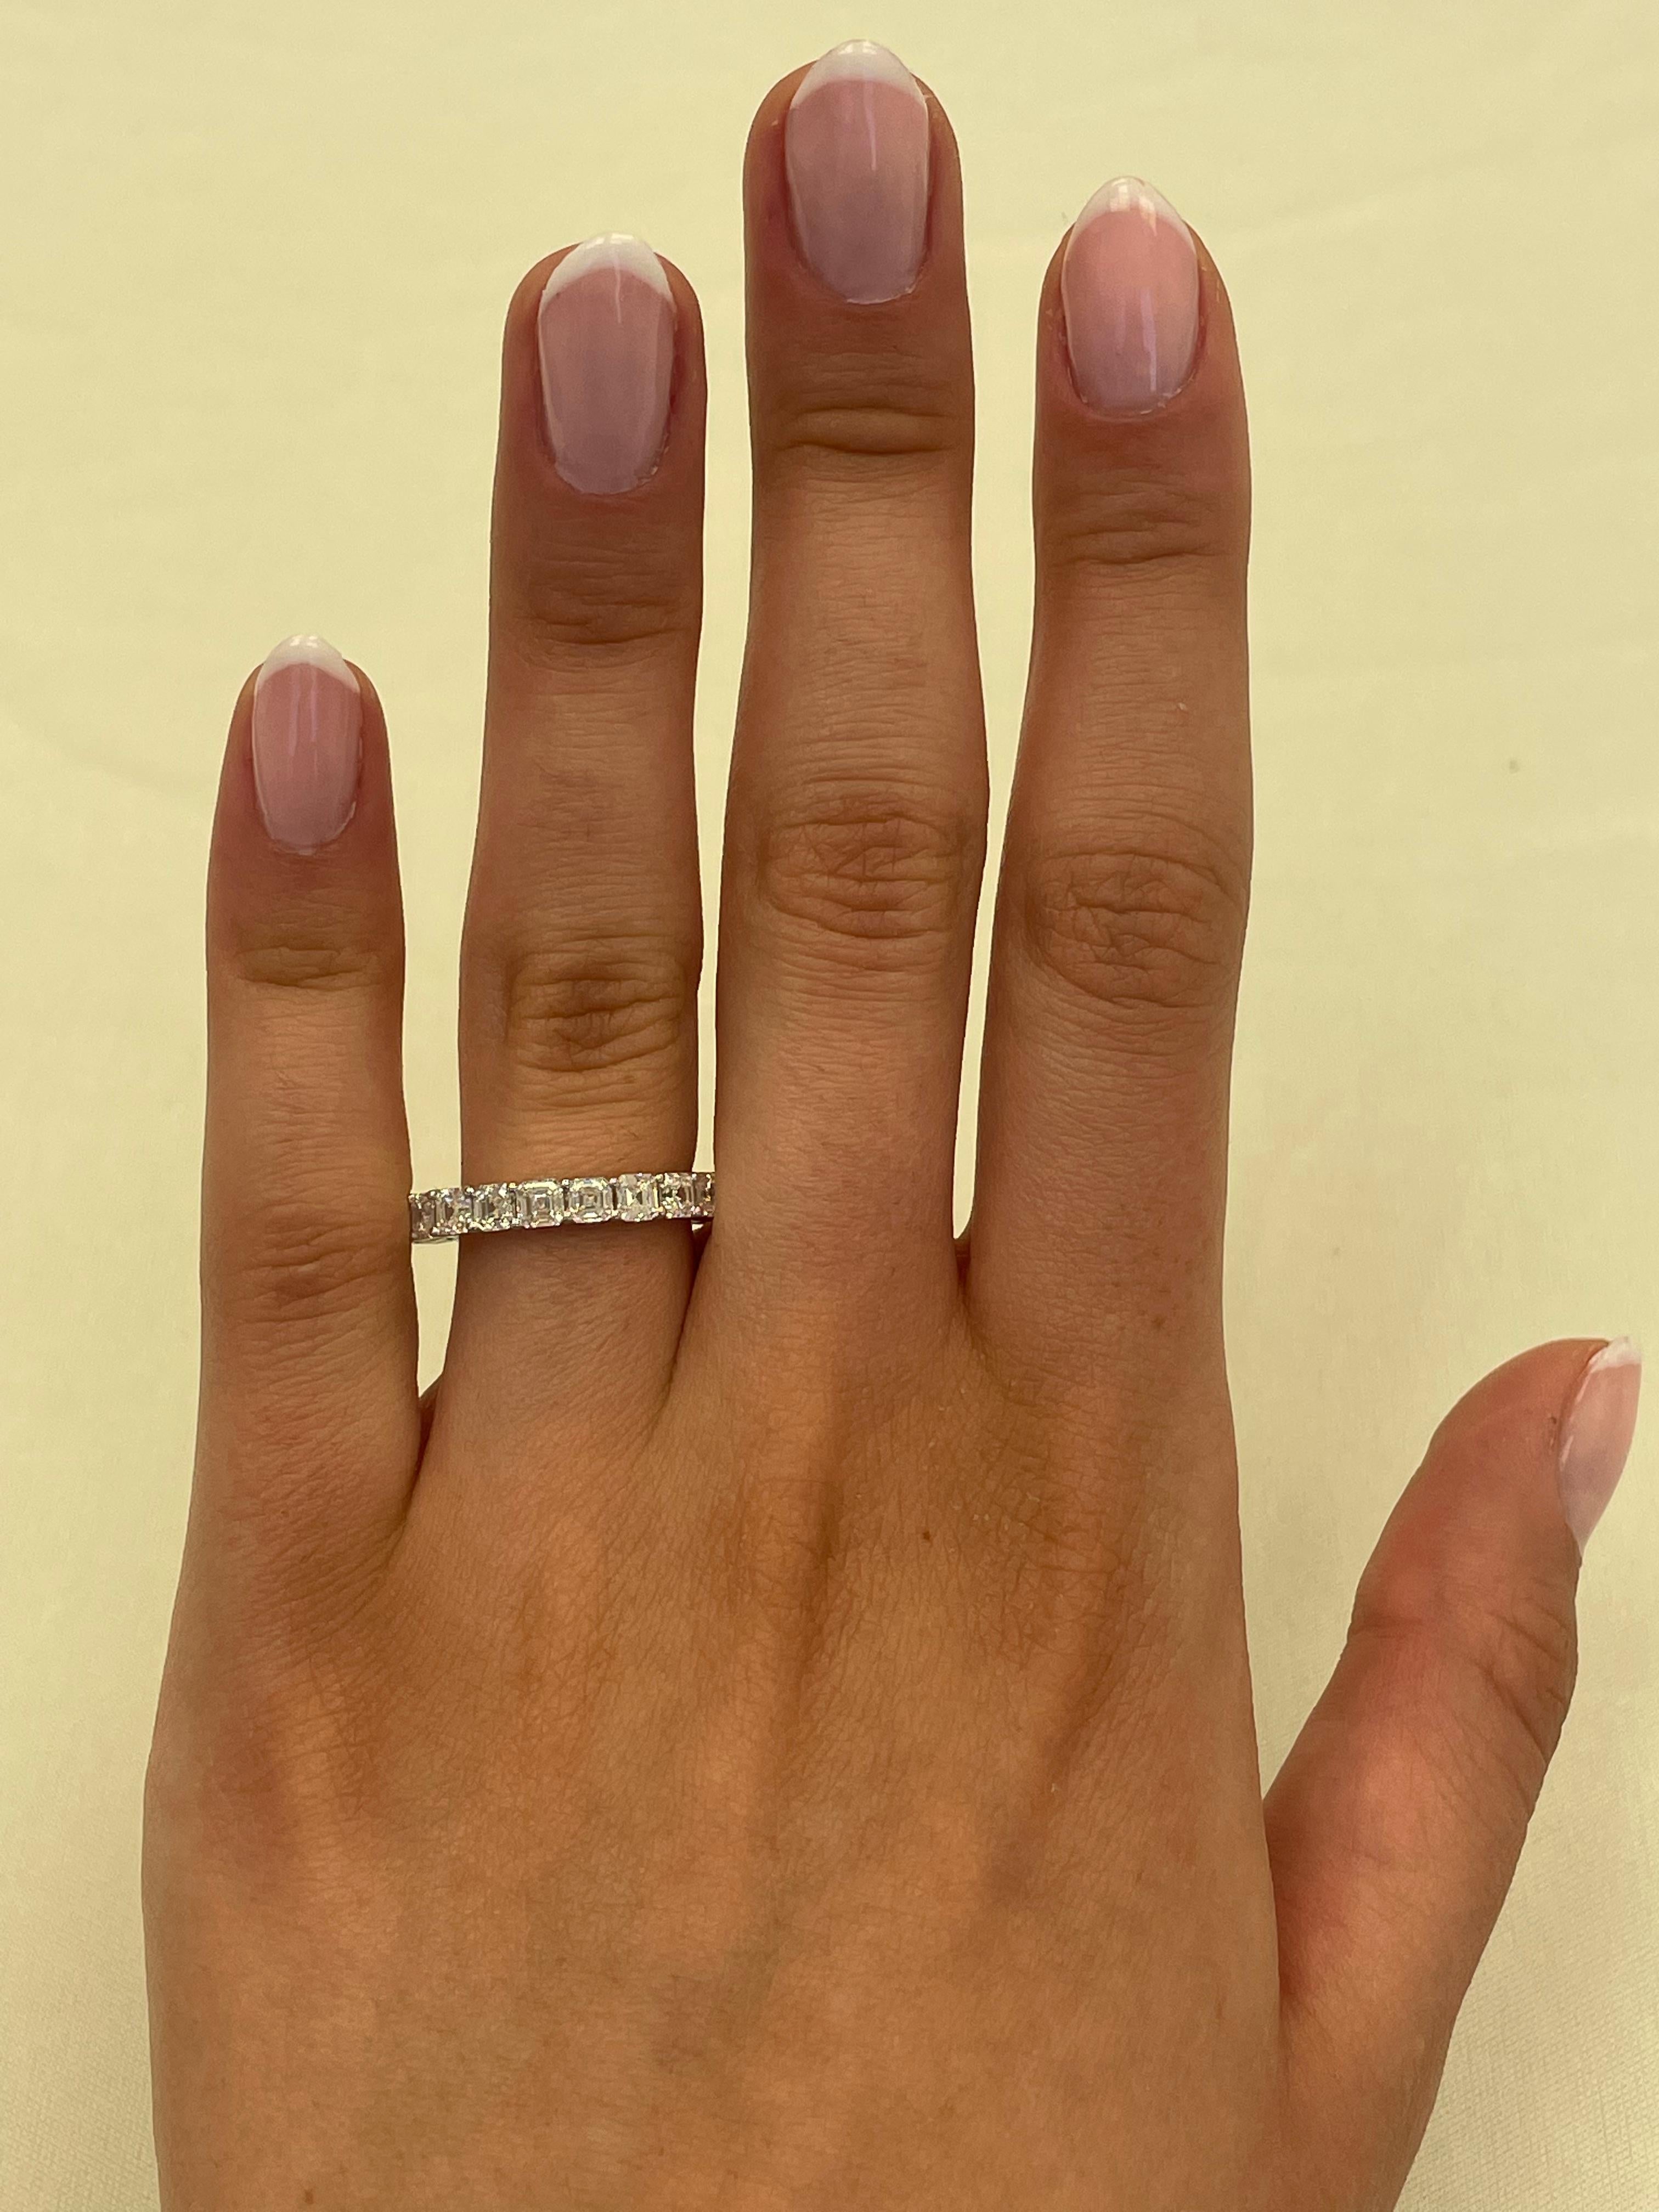 Stunning asscher cut diamond eternity band, By Alexander Beverly Hills.
21 asscher cut diamonds, 3.23 carats. D-F color and VVS clarity. 18-karat white gold, 3.28 grams, size 6. 
Accommodated with an up to date appraisal by a GIA G.G. upon request.